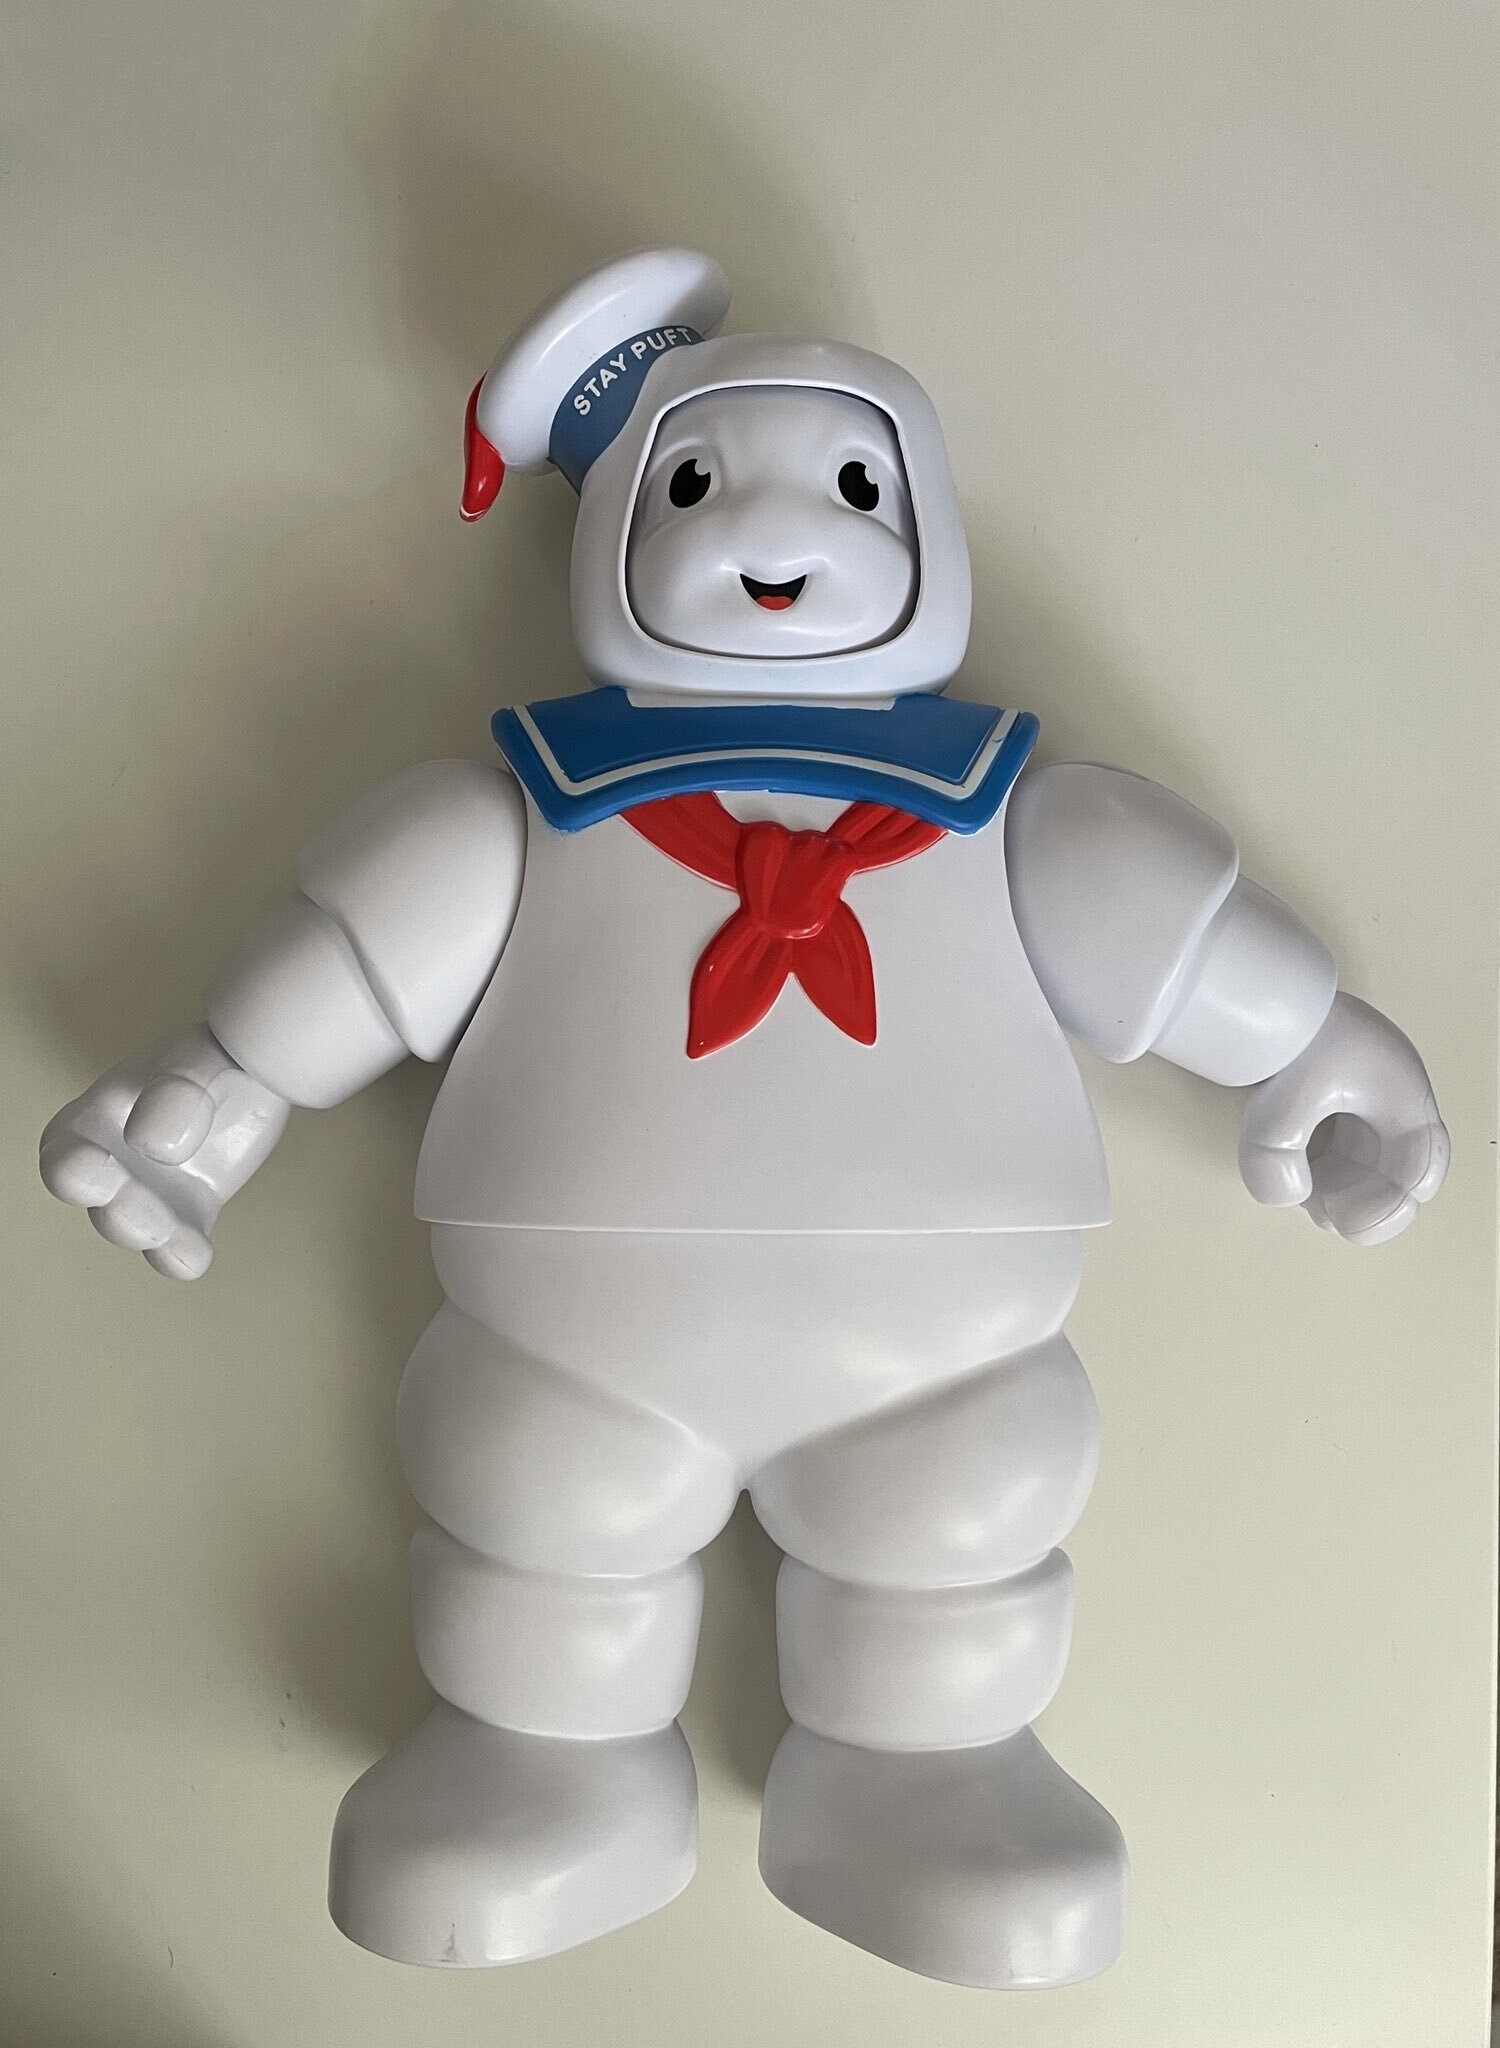 The Real Ghostbusters Kenner Classics 2020 Wave 1 Has Stay-Puft Marshmallow Man